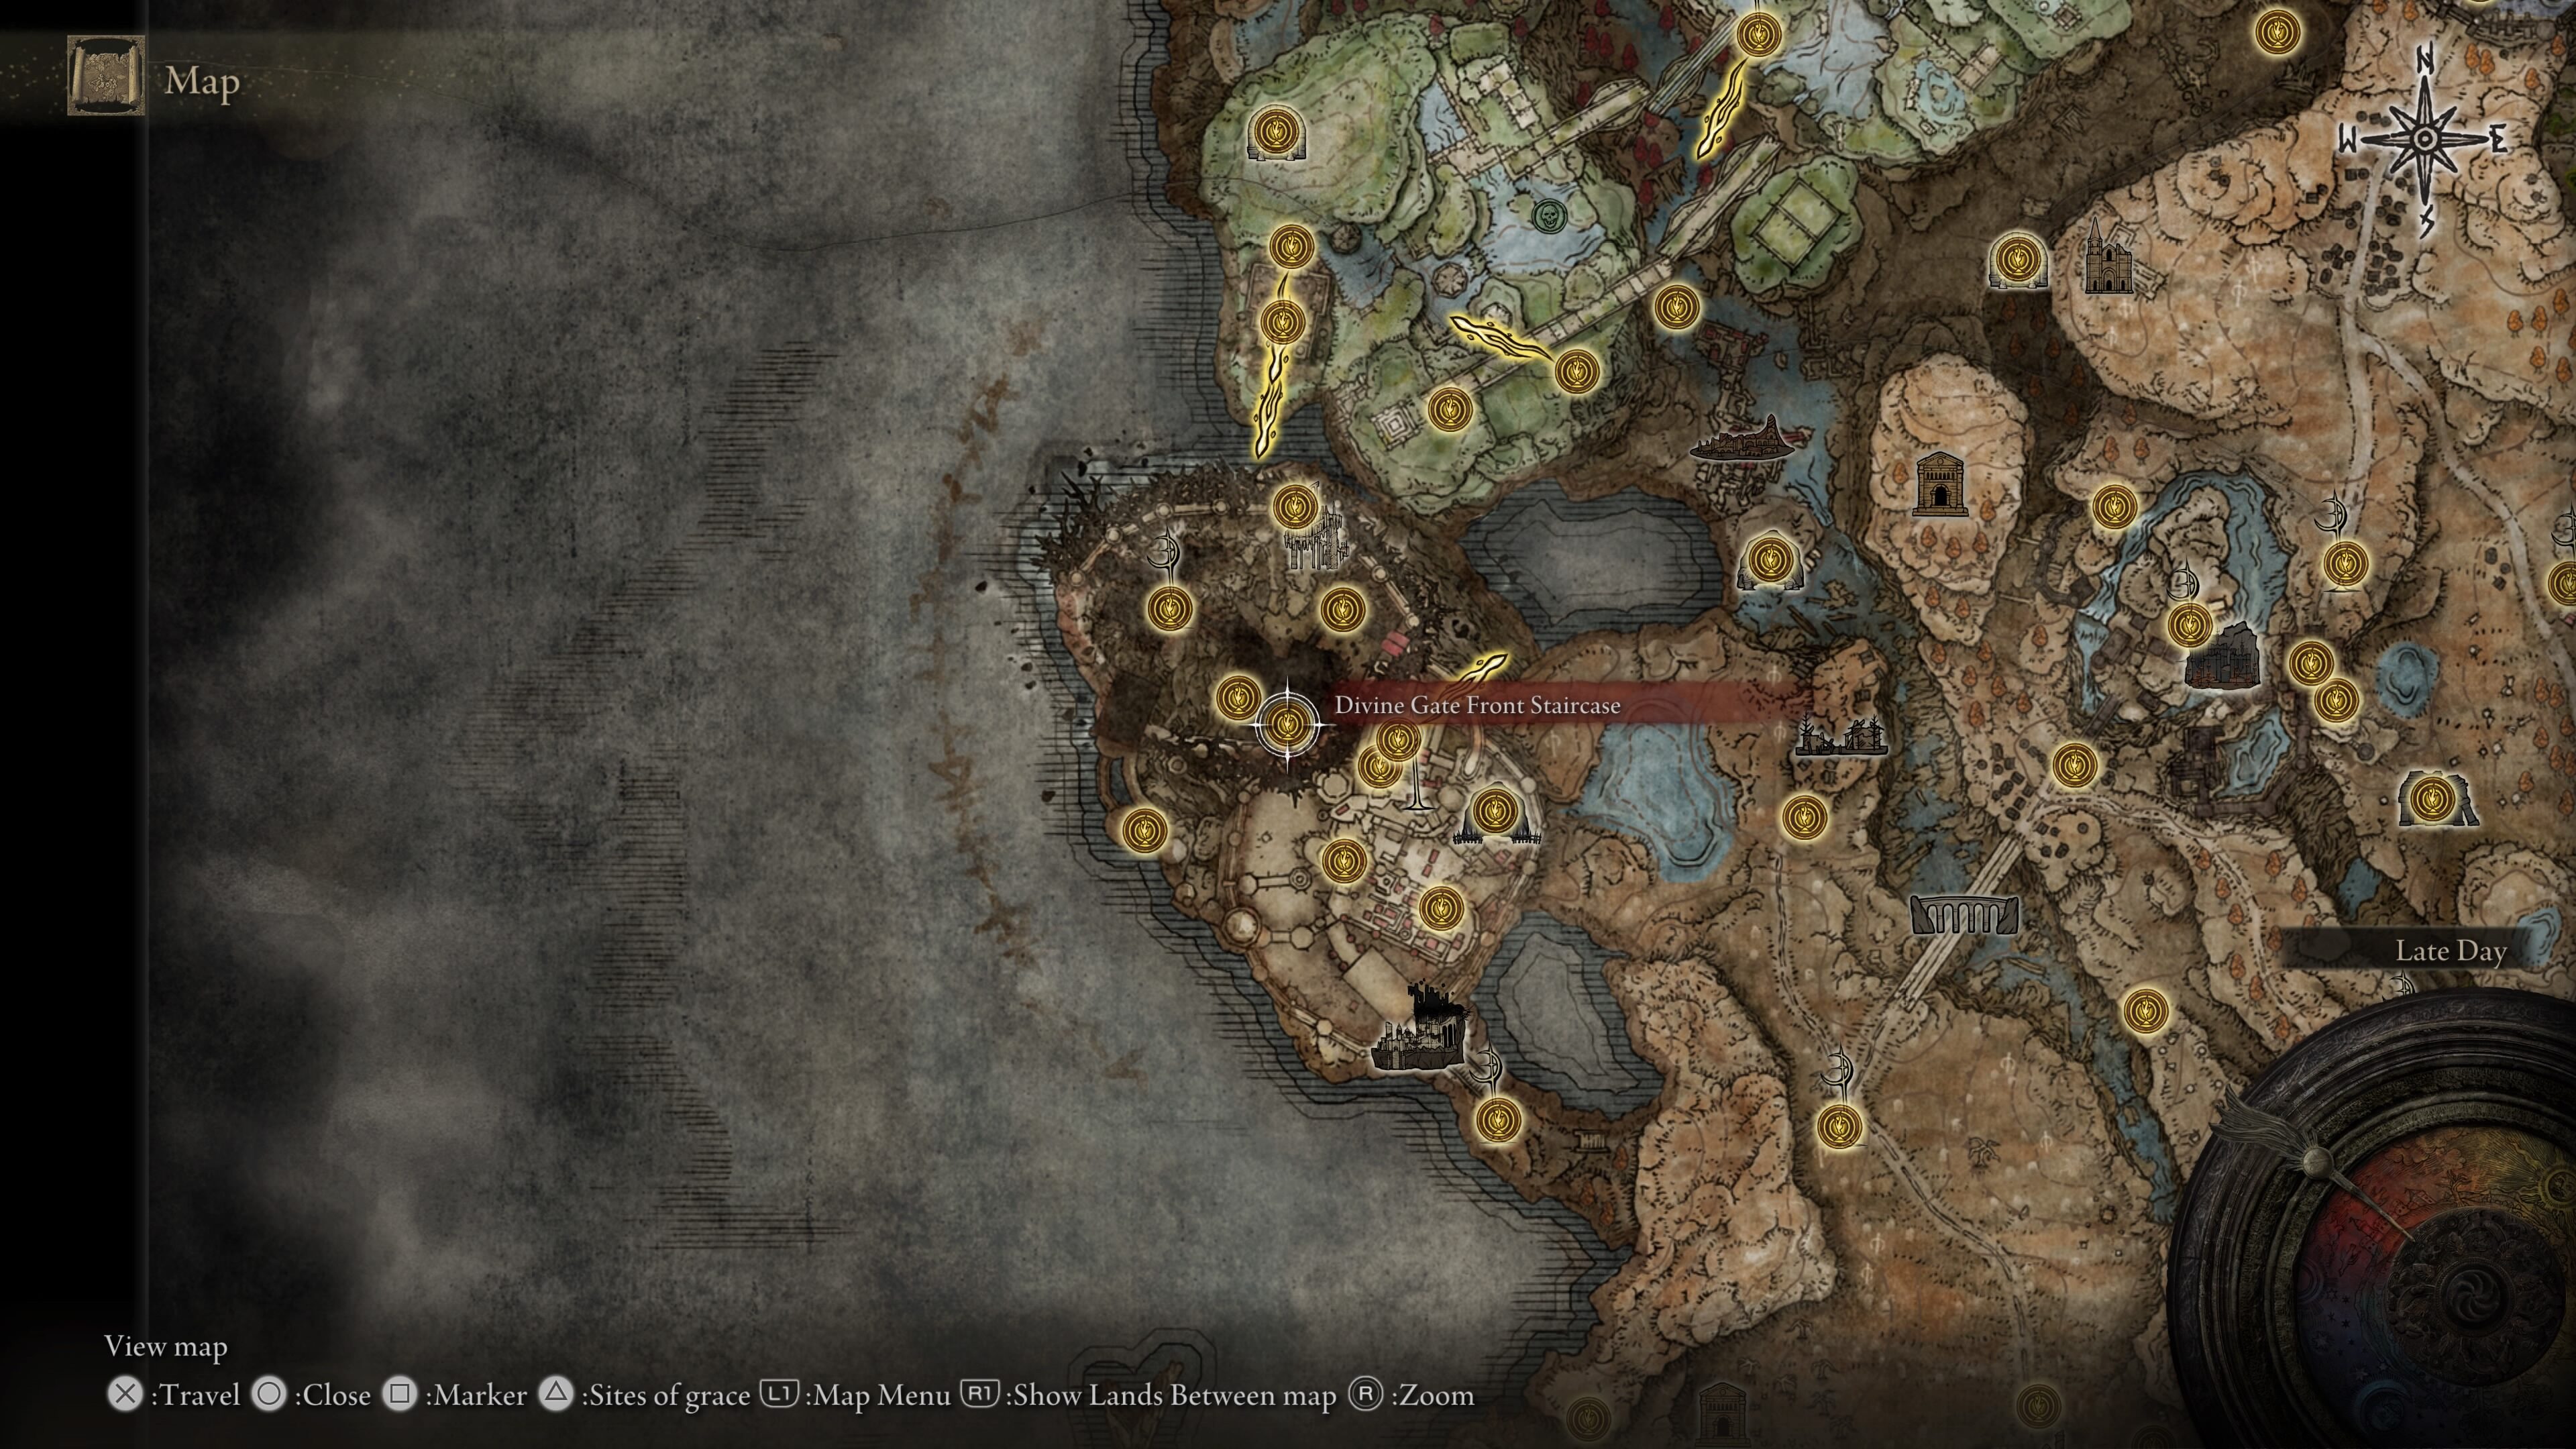 elden ring shadow of the erdtree how to beat promised consort radahn - a map showing the boss room location